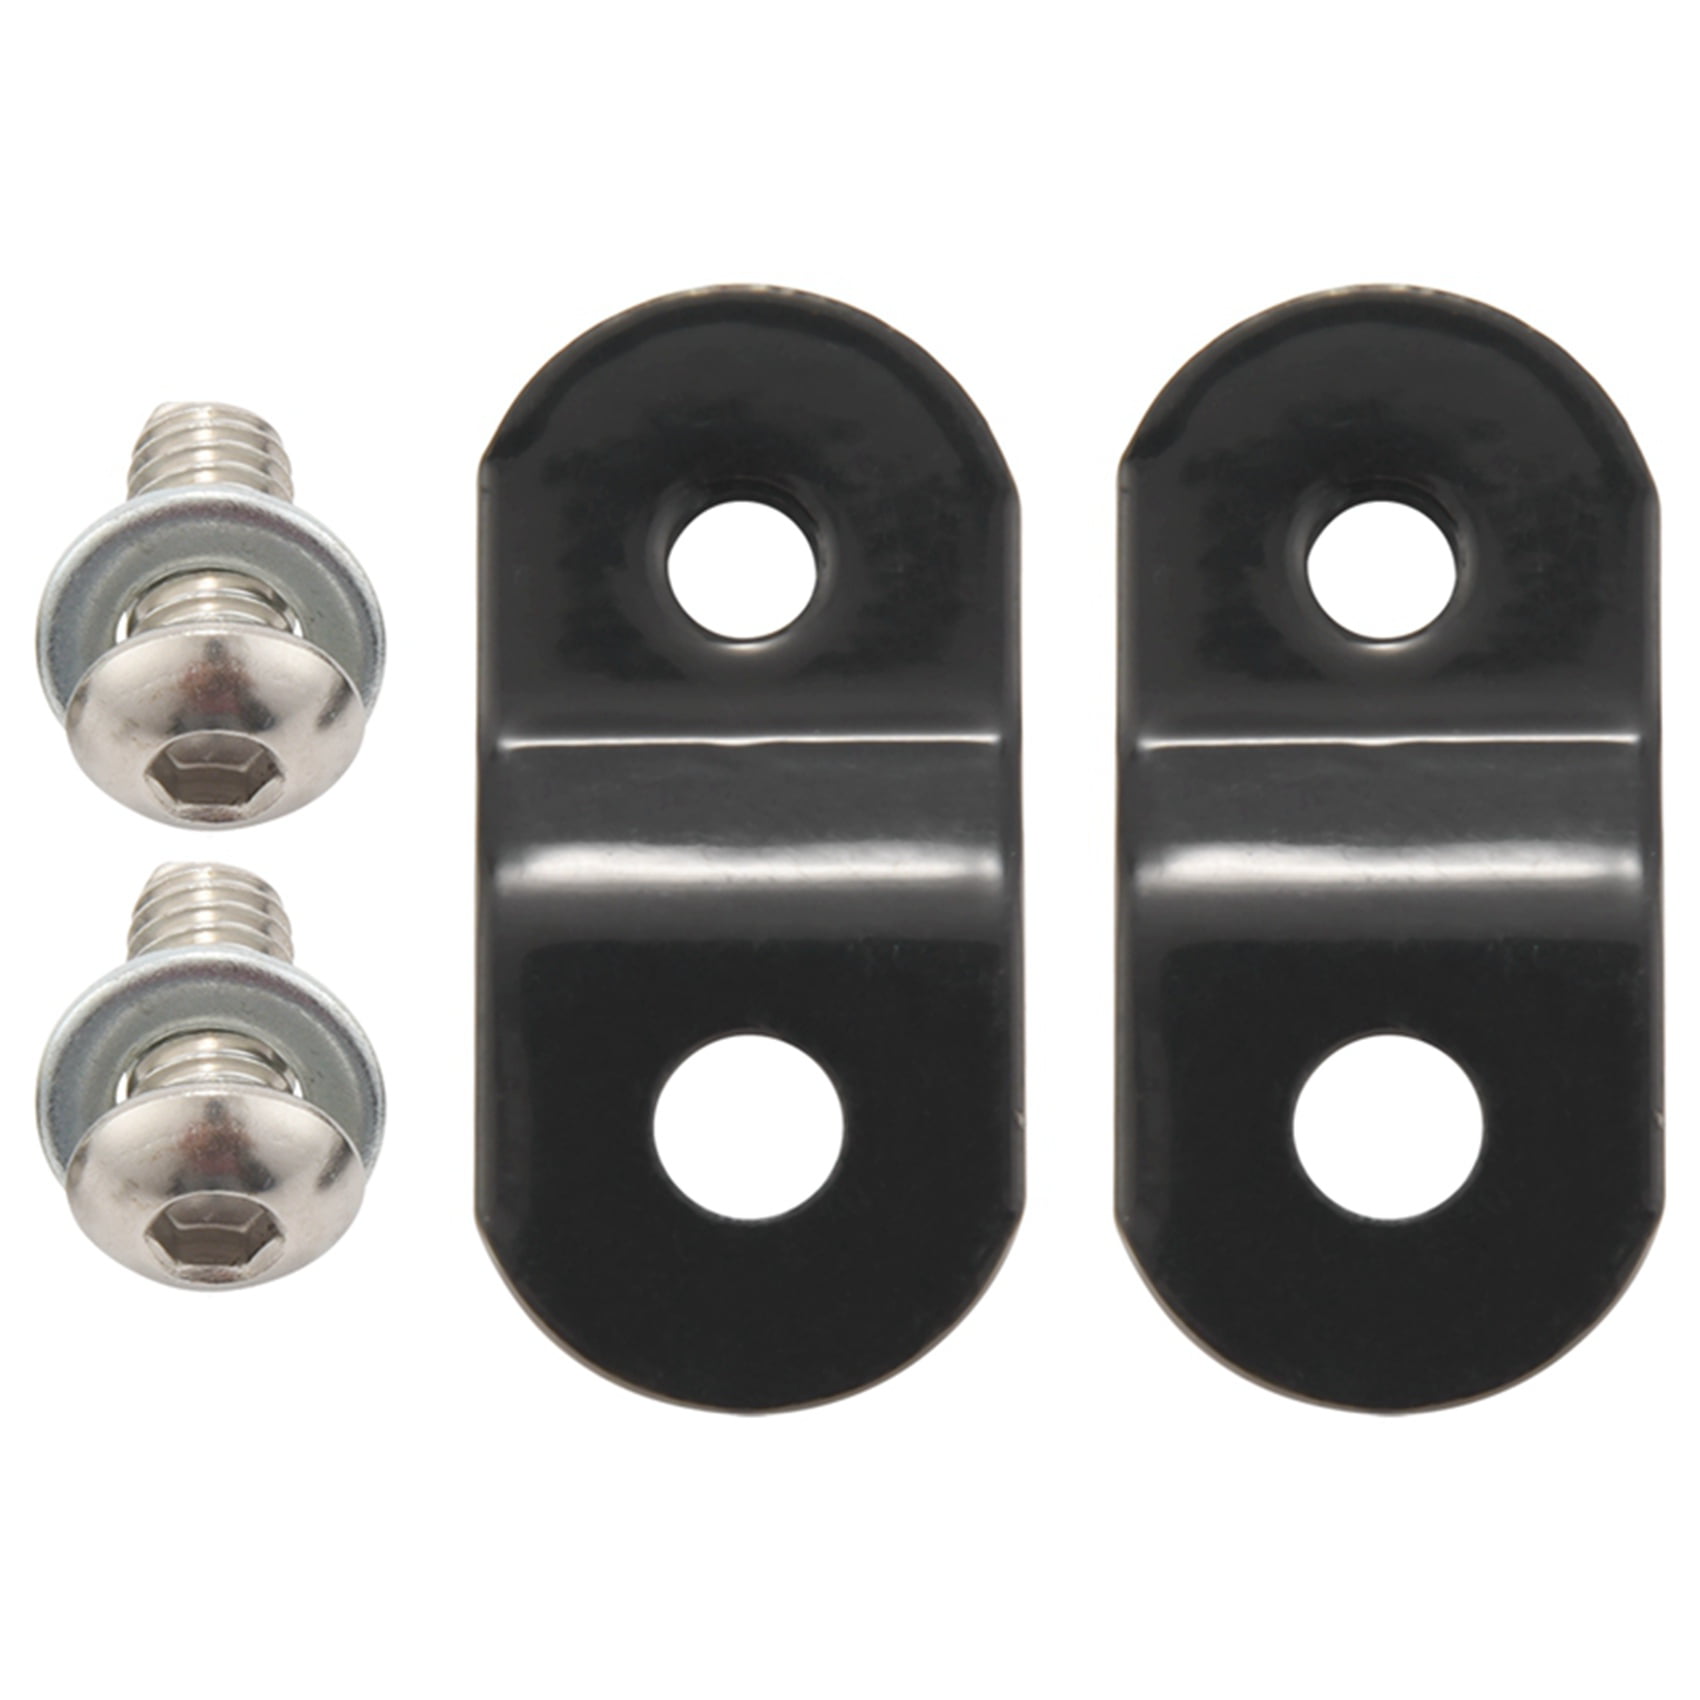 28mm Motorcycle Raise Tank Lift Modified Risers w/bolt For Harley Sportster Dyna Iron XL 883 1200 48 72 